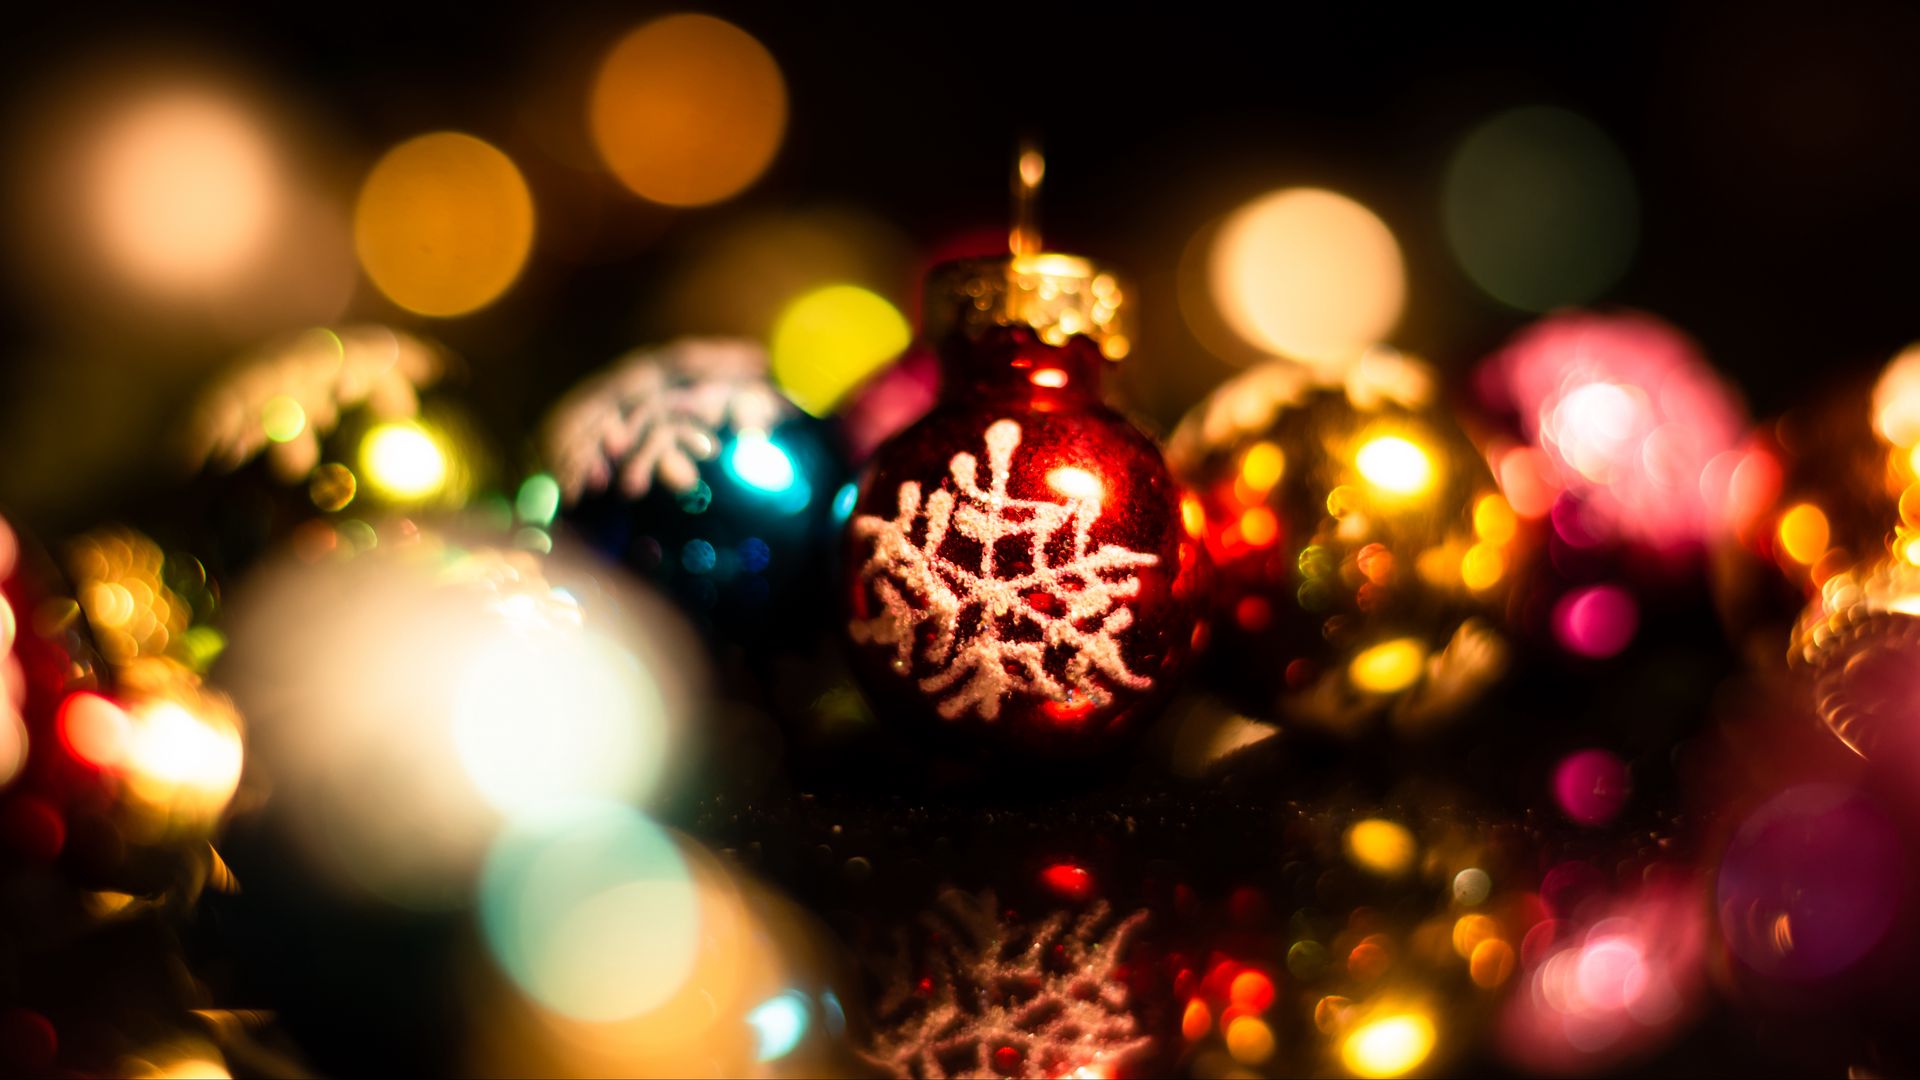 Download wallpaper 1920x1080 decorations, balls, colorful, new year ...